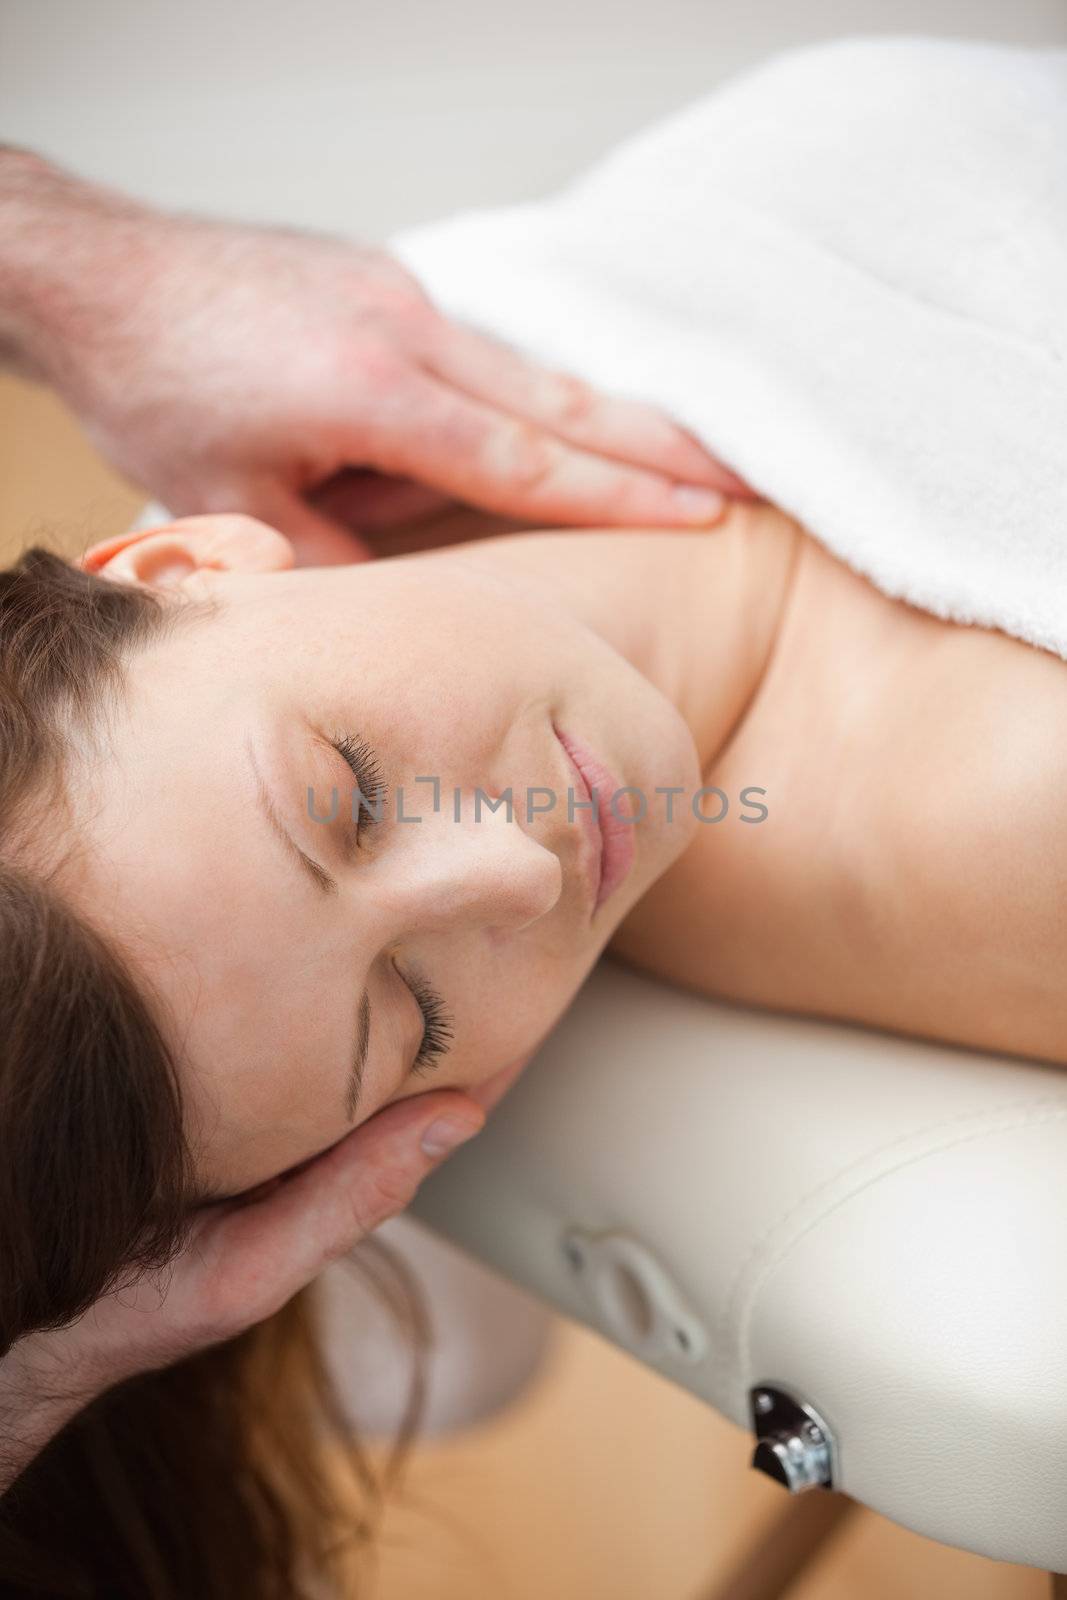 Neck of a patient being massaged by a chiropractor in a room